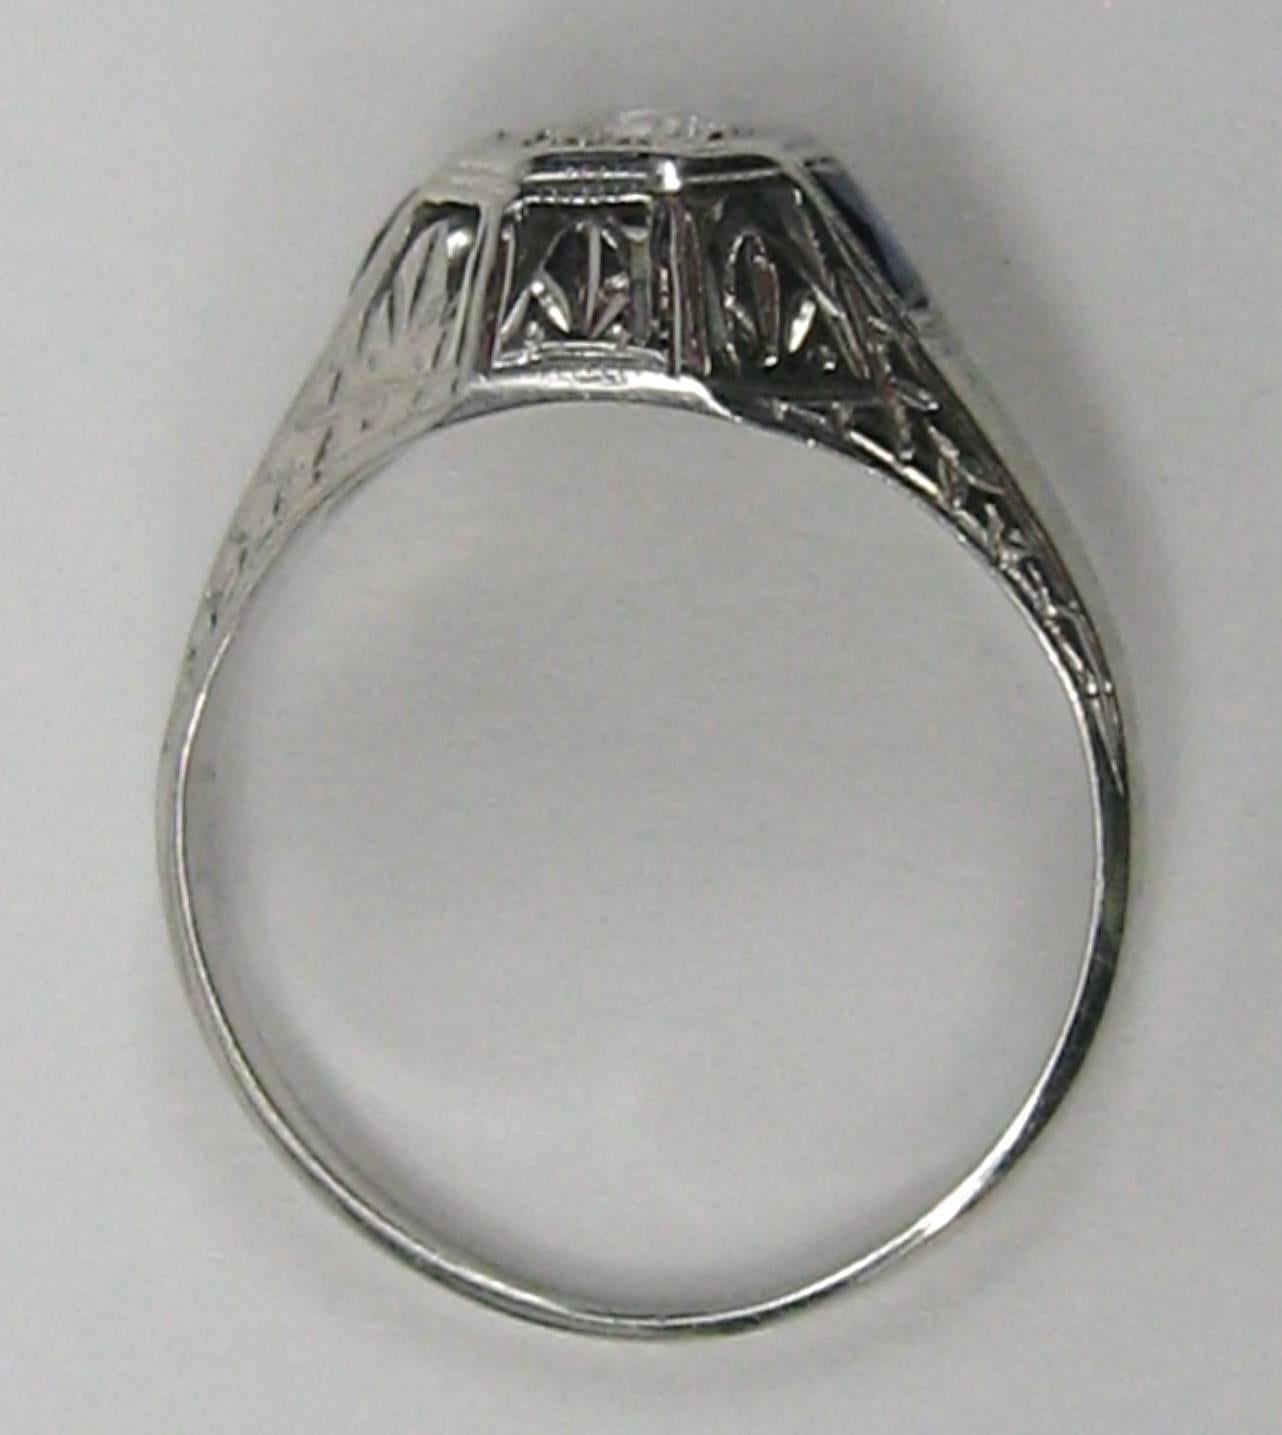 Diamond 14 Karat White Gold Ring 1920s Art Deco In Good Condition For Sale In Wallkill, NY